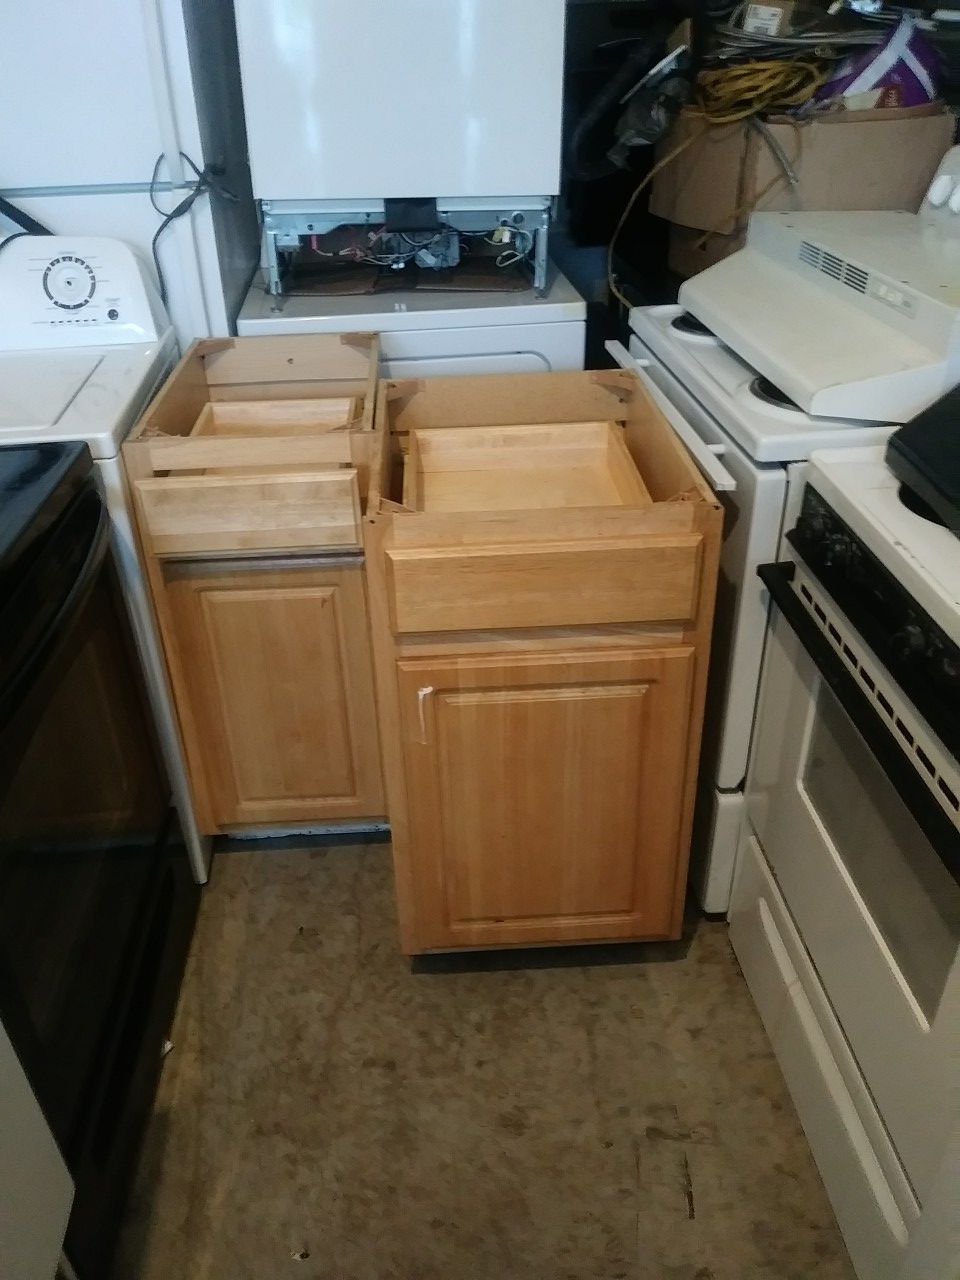 Solid wood kitchen cabinets also bathroom cabinets